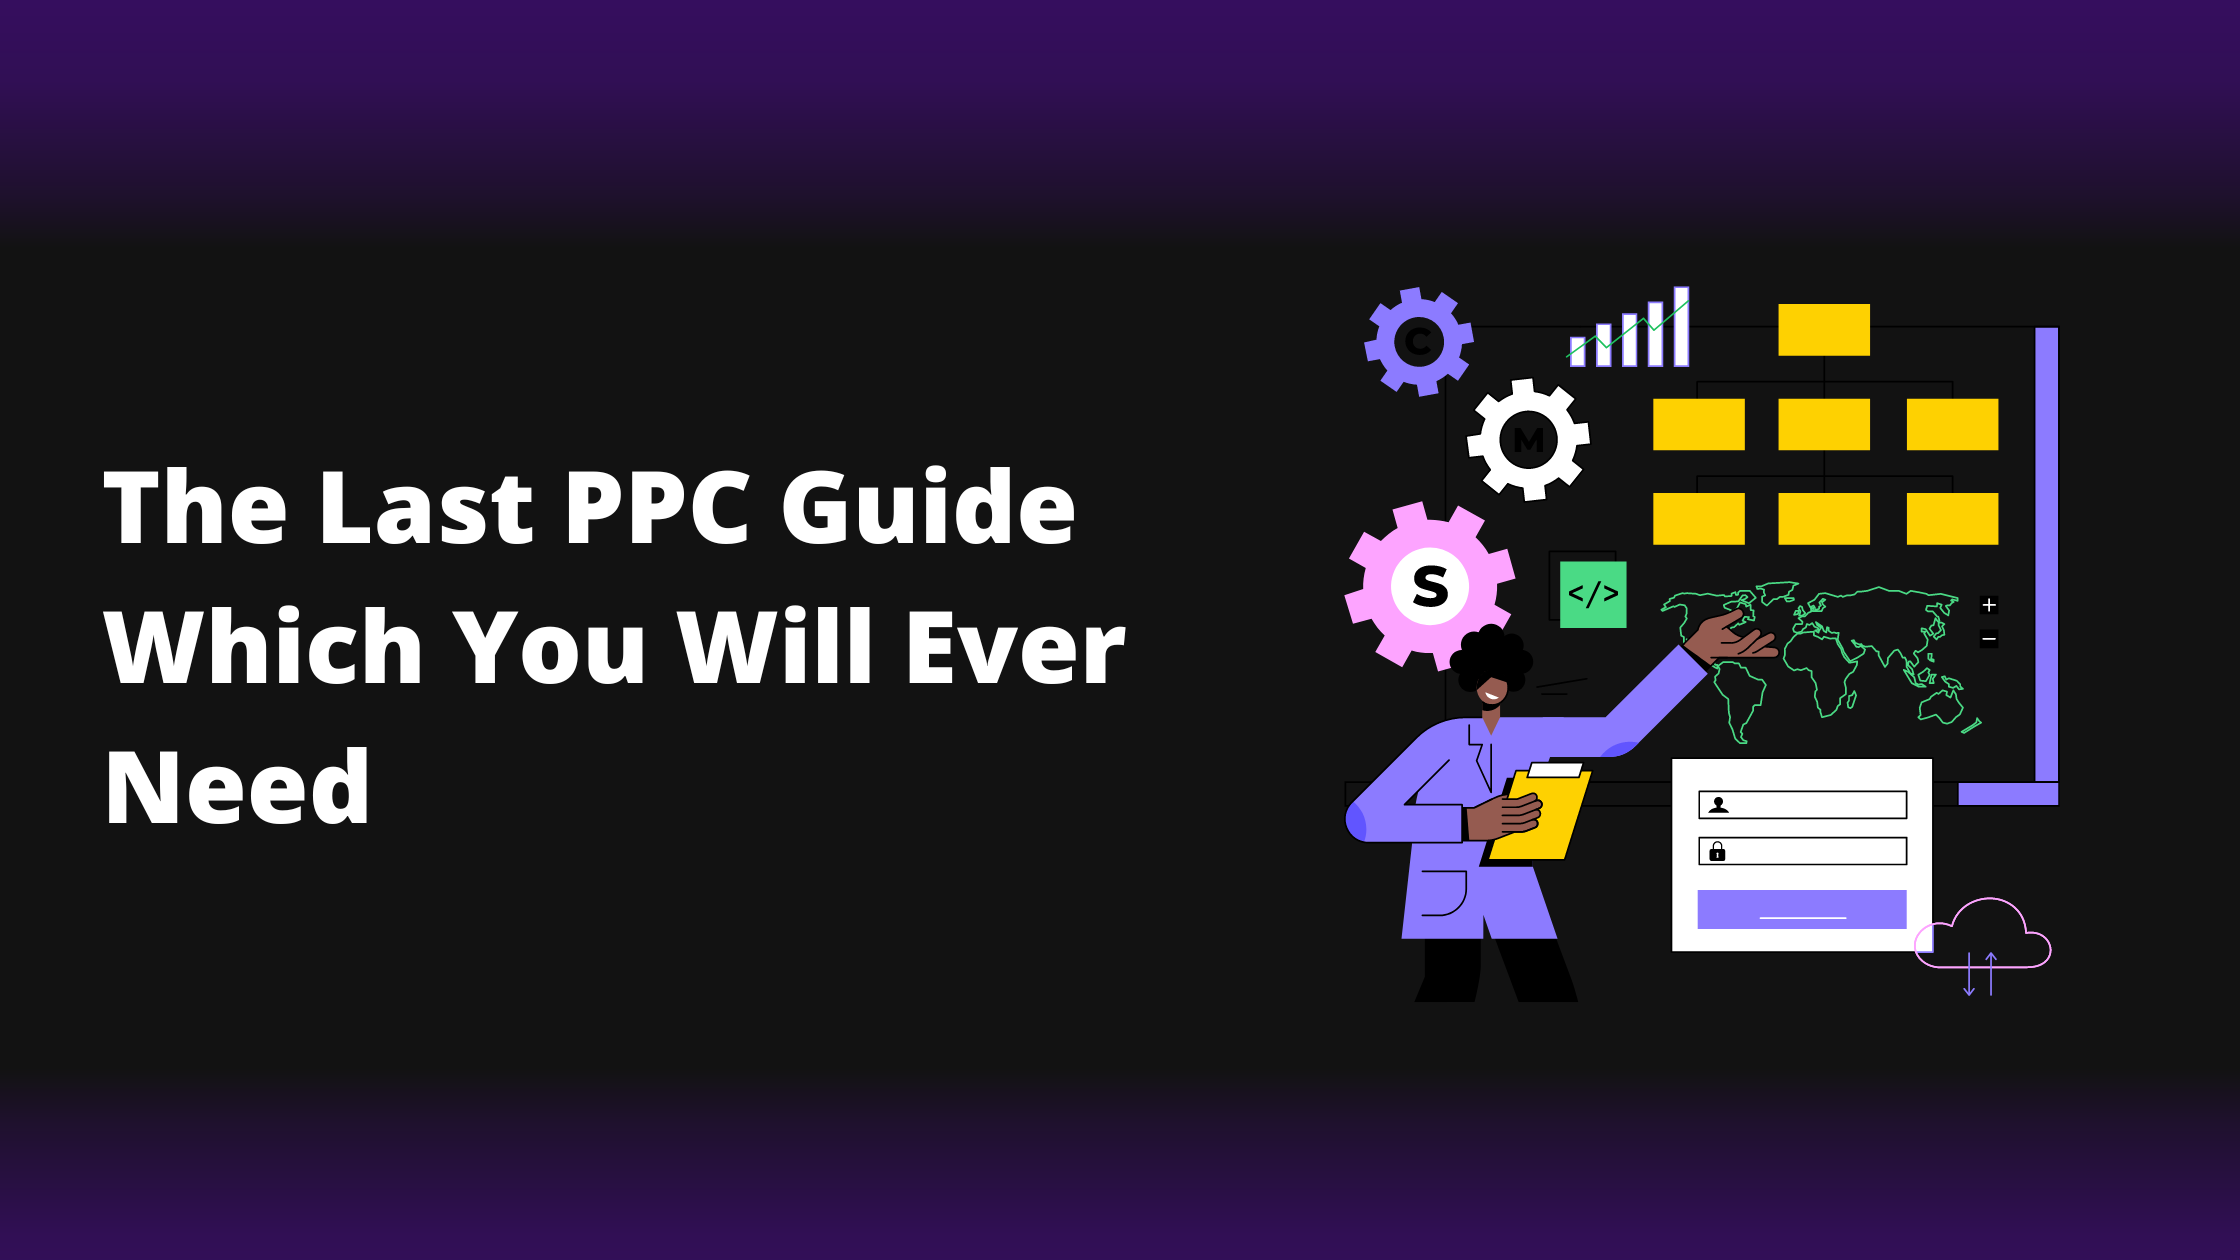 The Last PPC Guide Which You Will Ever Need